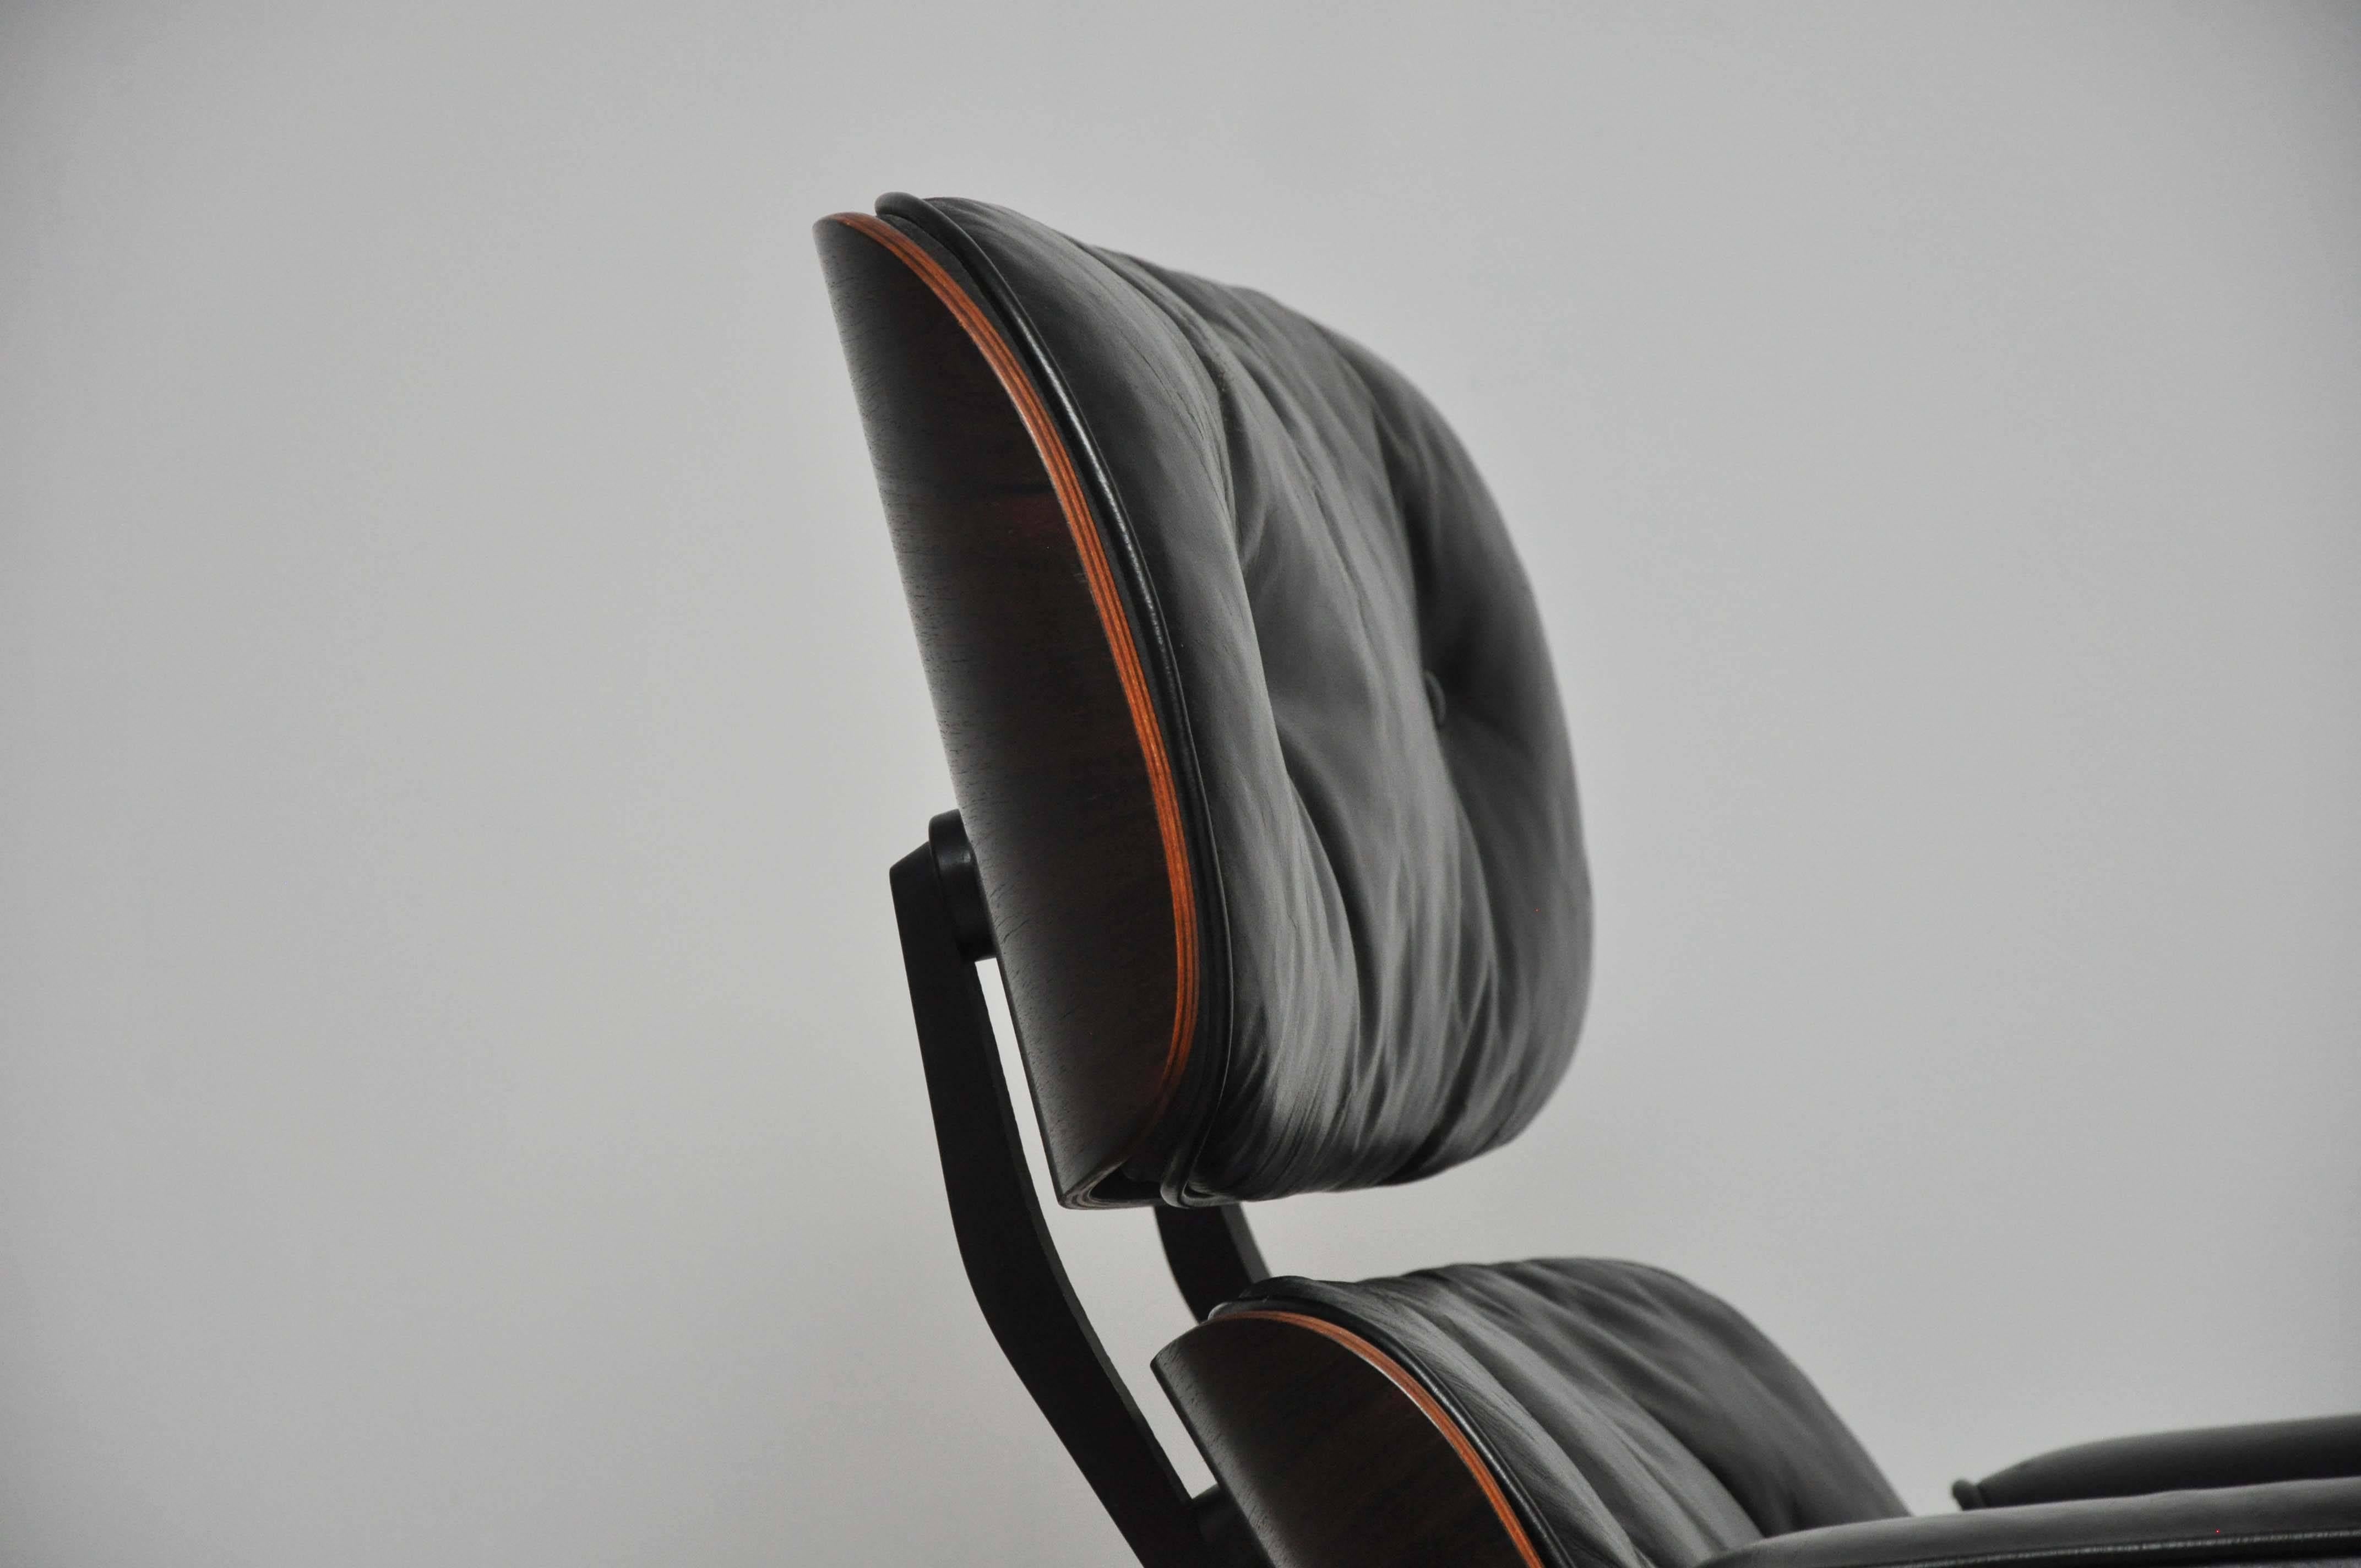 American Early Rosewood Charles Eames Lounge Chair for Herman Miller